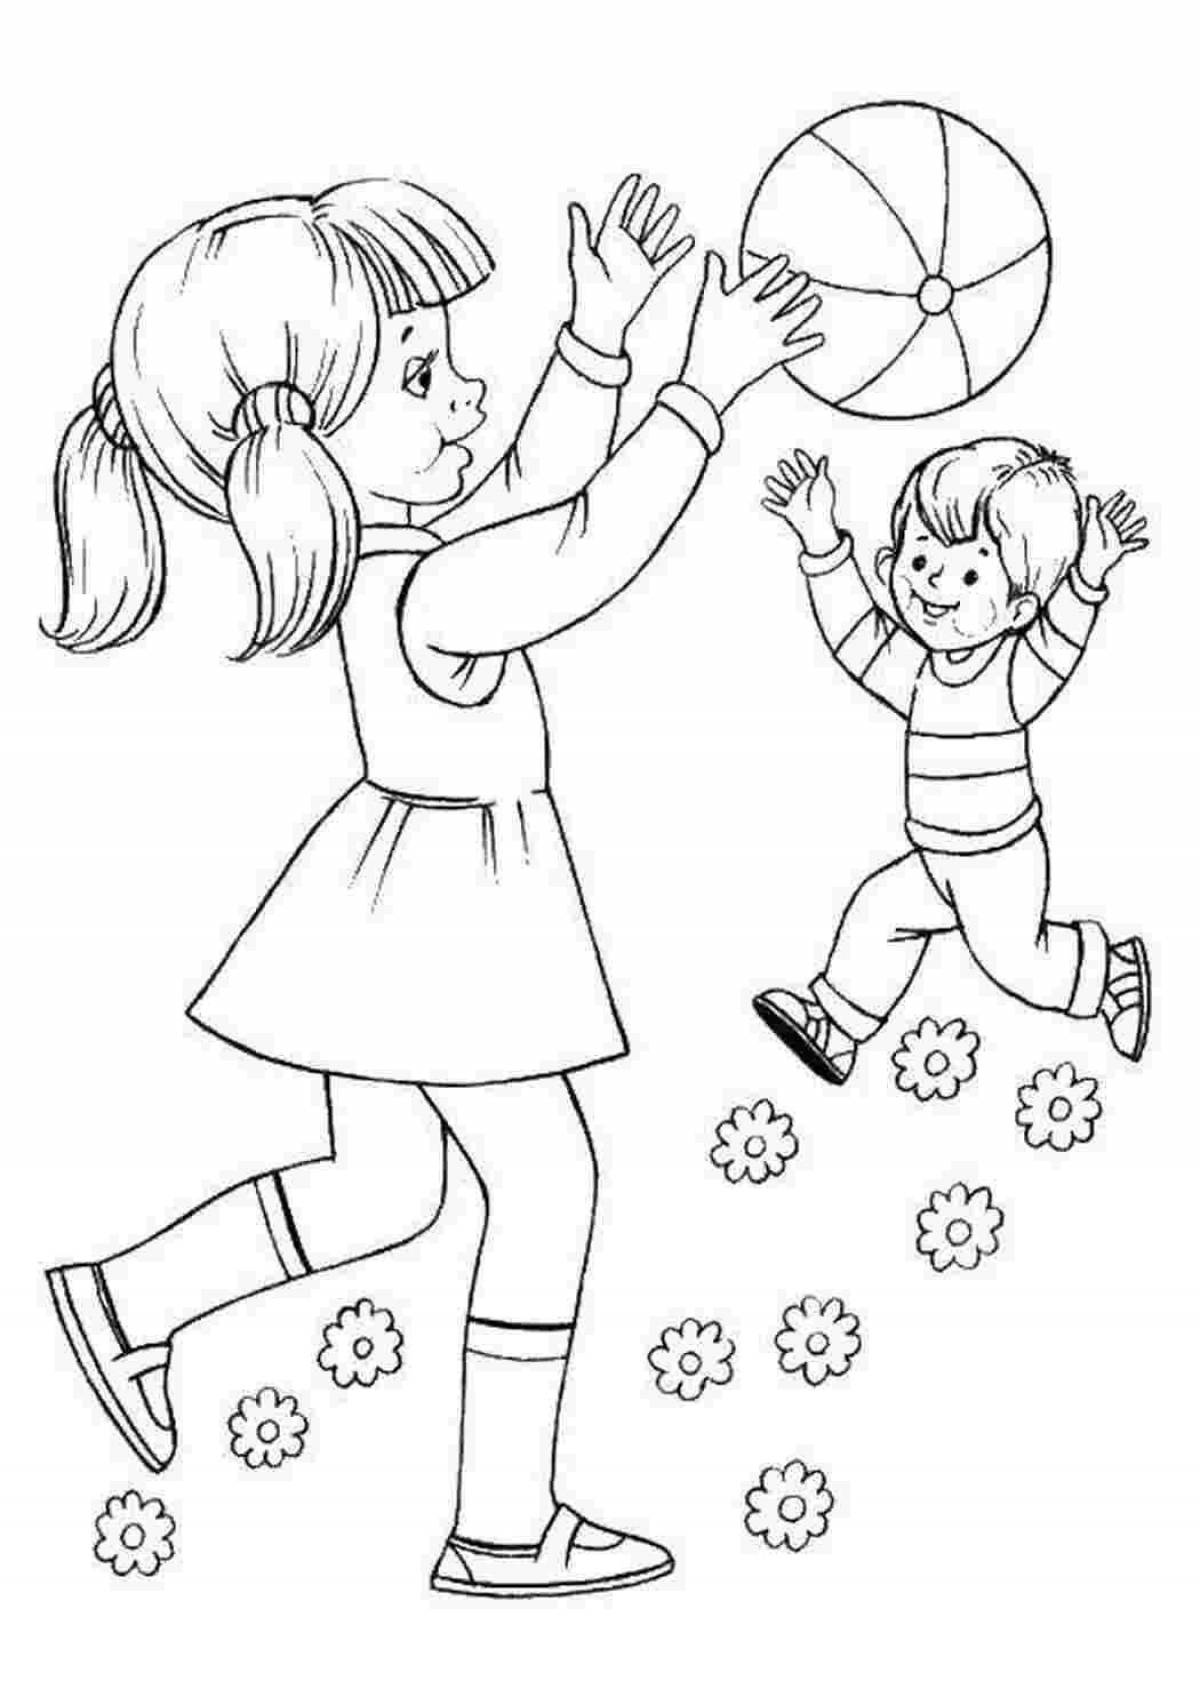 Color-explosion gimme game coloring page